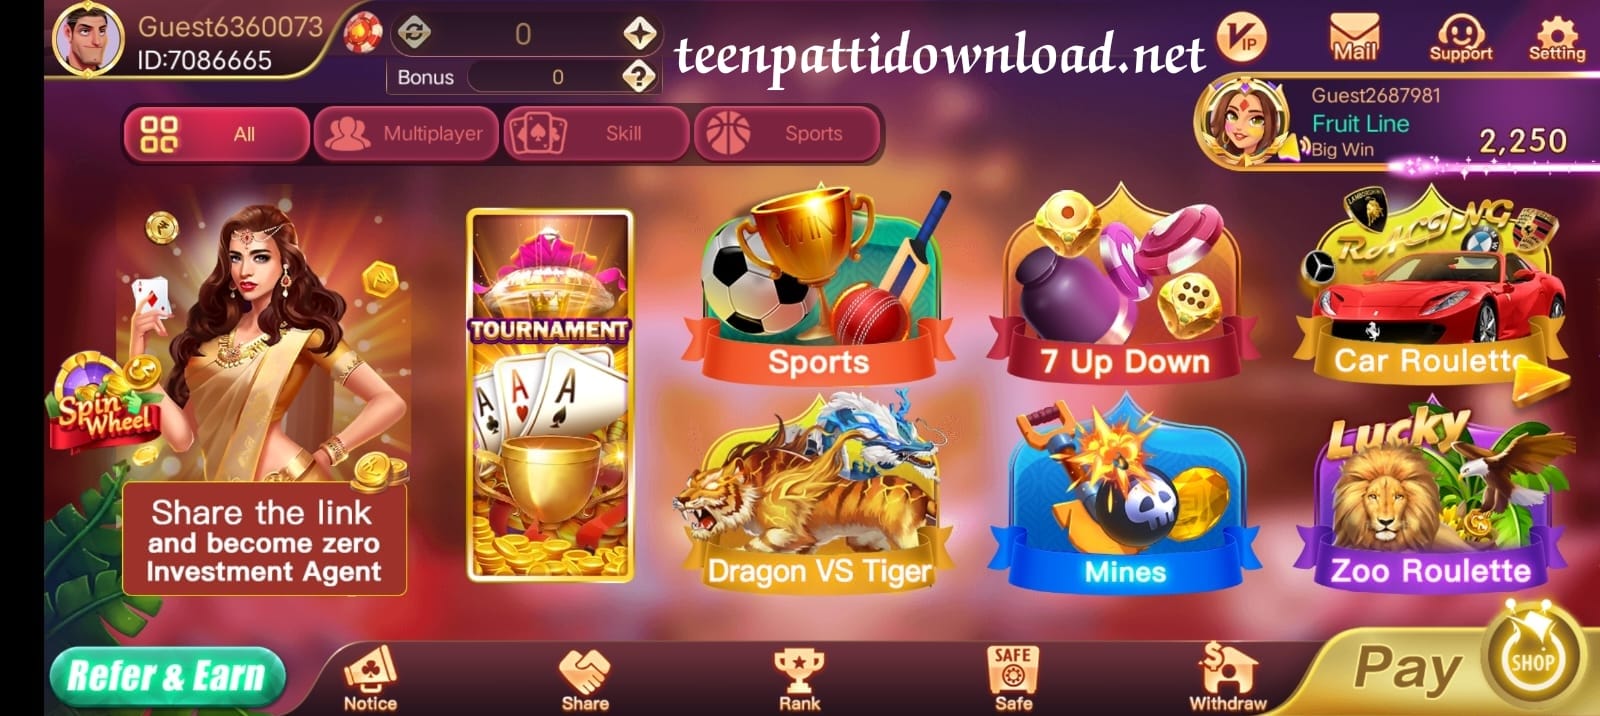 Available Game’s In Teen Patti Sky Apk ?